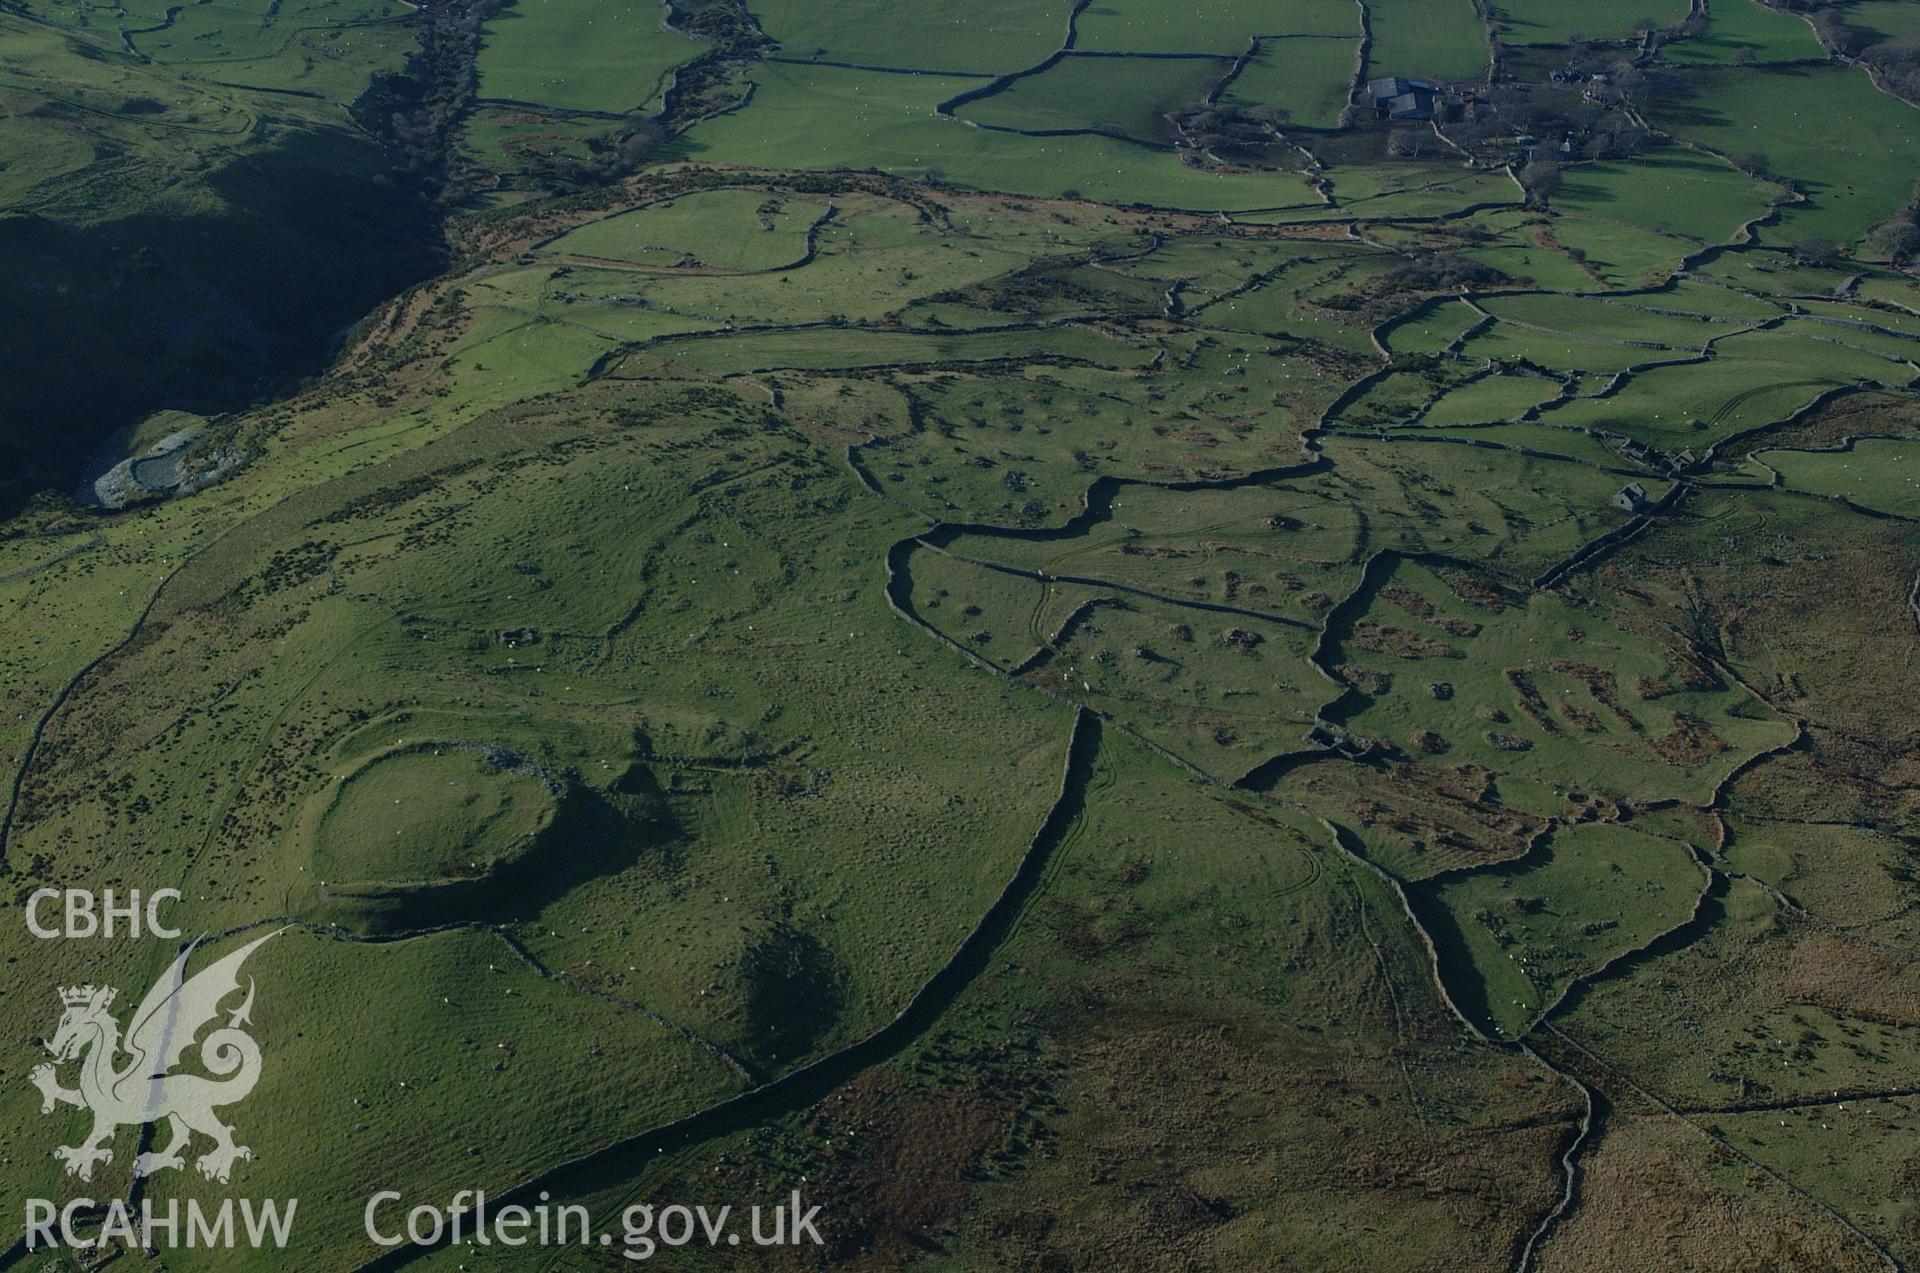 RCAHMW colour oblique aerial photograph of Pen-y-dinas taken on 24/01/2005 by Toby Driver